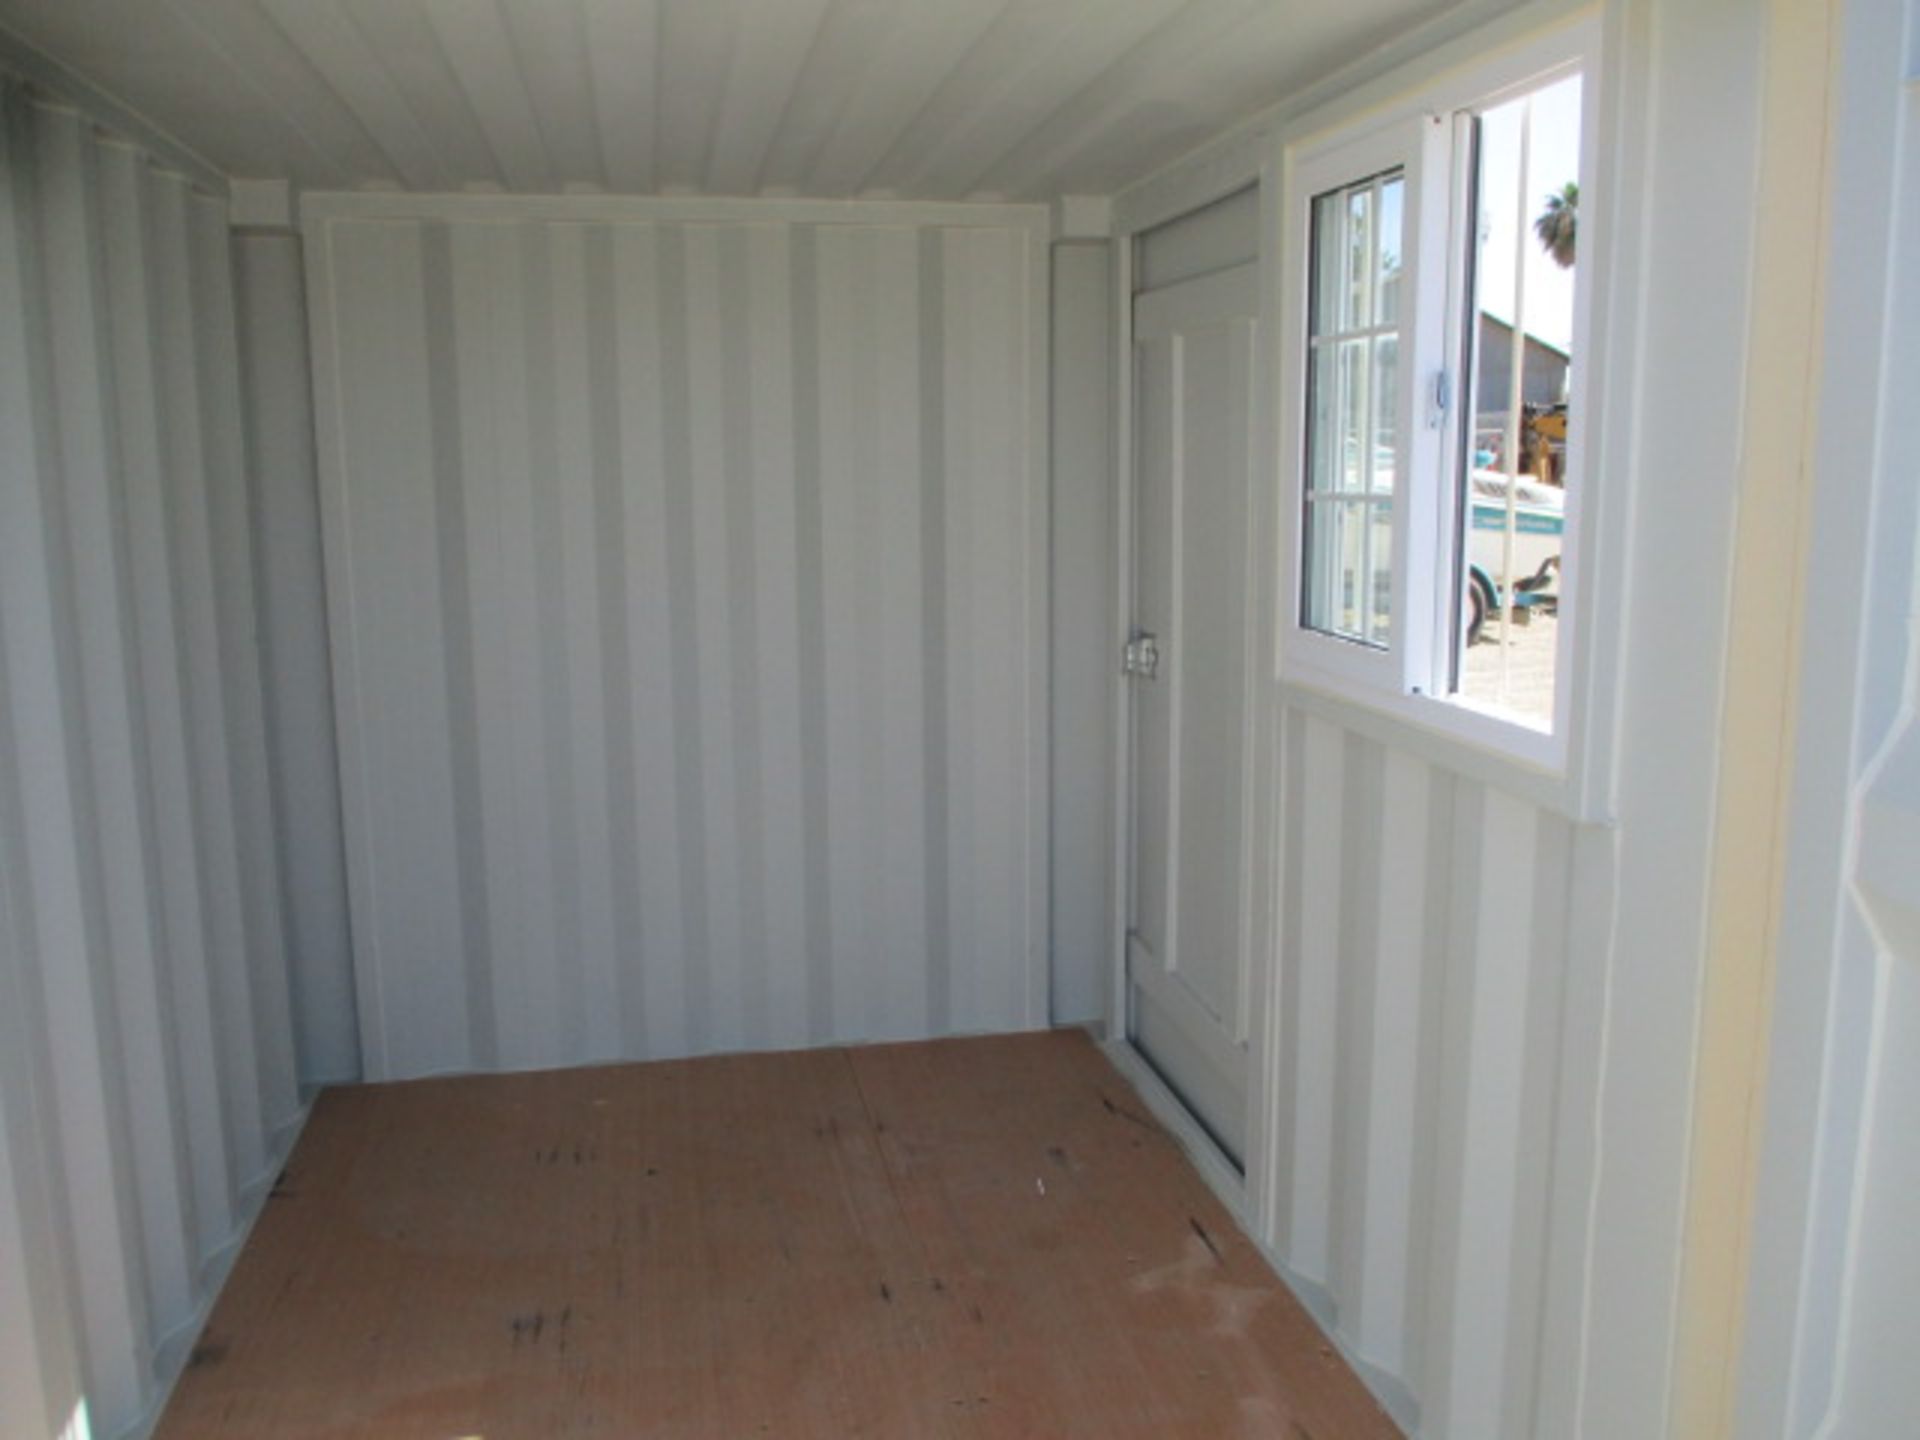 Unused 8' Portable Office Container, S/N: LYP8-436 - Image 16 of 24